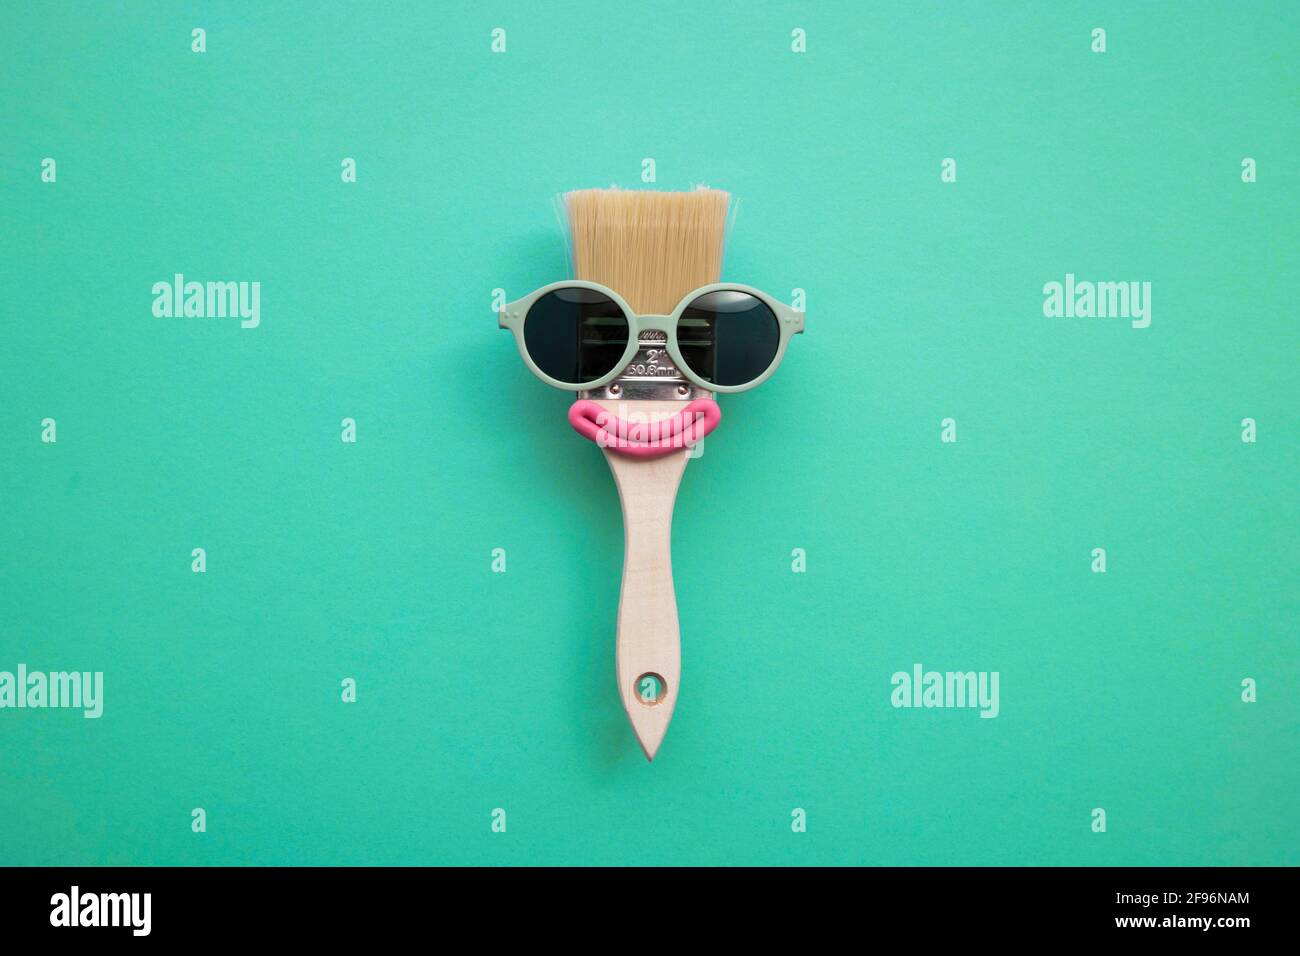 Paint brush diy character with sunglasses and smile Stock Photo